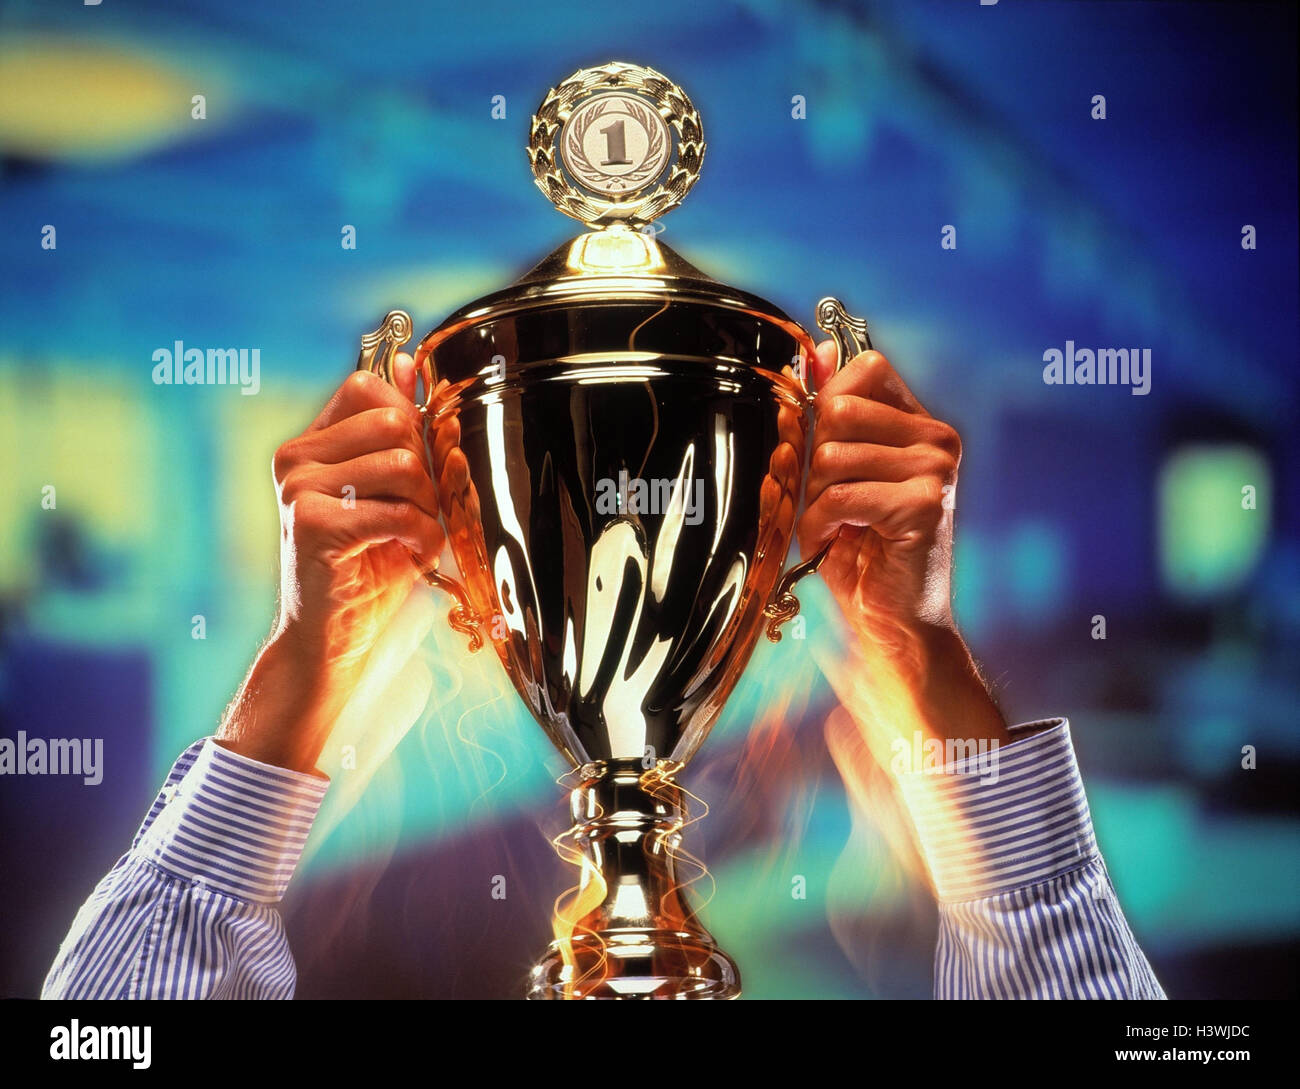 Man, detail, hands, cup, hold, makes unfamiliar first, winner, winner, price, victory price, sports price, award, sports award, trophy, victory trophy Stock Photo